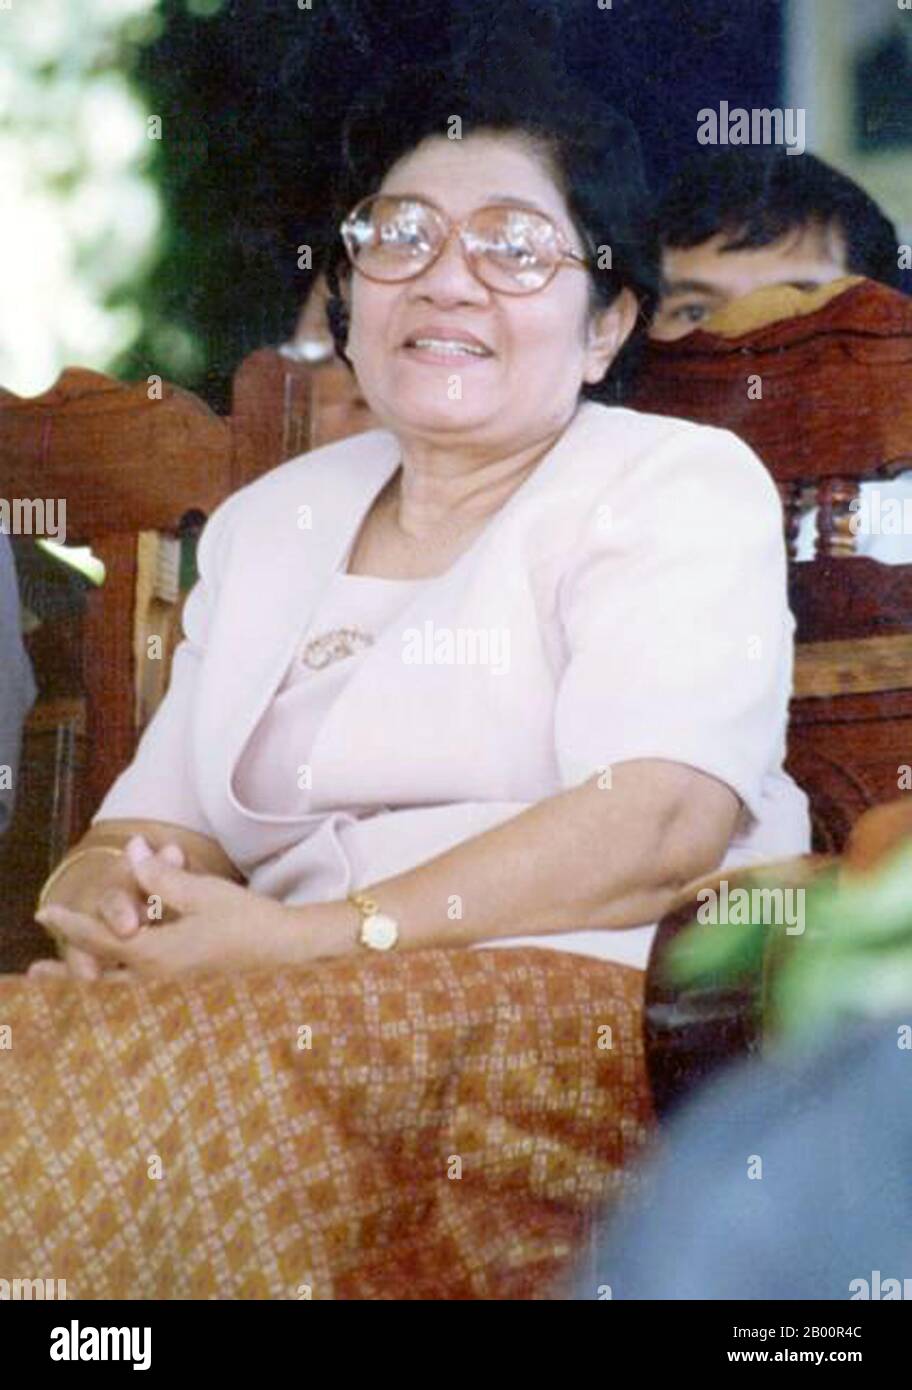 Cambodia: Ieng Thirith (born 1932), former member of the Khmer Rouge Central Committee. Wife of Ieng Sary and sister-in-law of Pol Pot, she was Khmer Rouge Minister of Social Action (1975-79). Ieng Thirith was arrested by the Extraordinary Chamber in the Courts of Cambodia (ECCC) in November 2007 with her husband, Ieng Sary, suspected of genocide, war crimes and crimes against humanity. Stock Photo